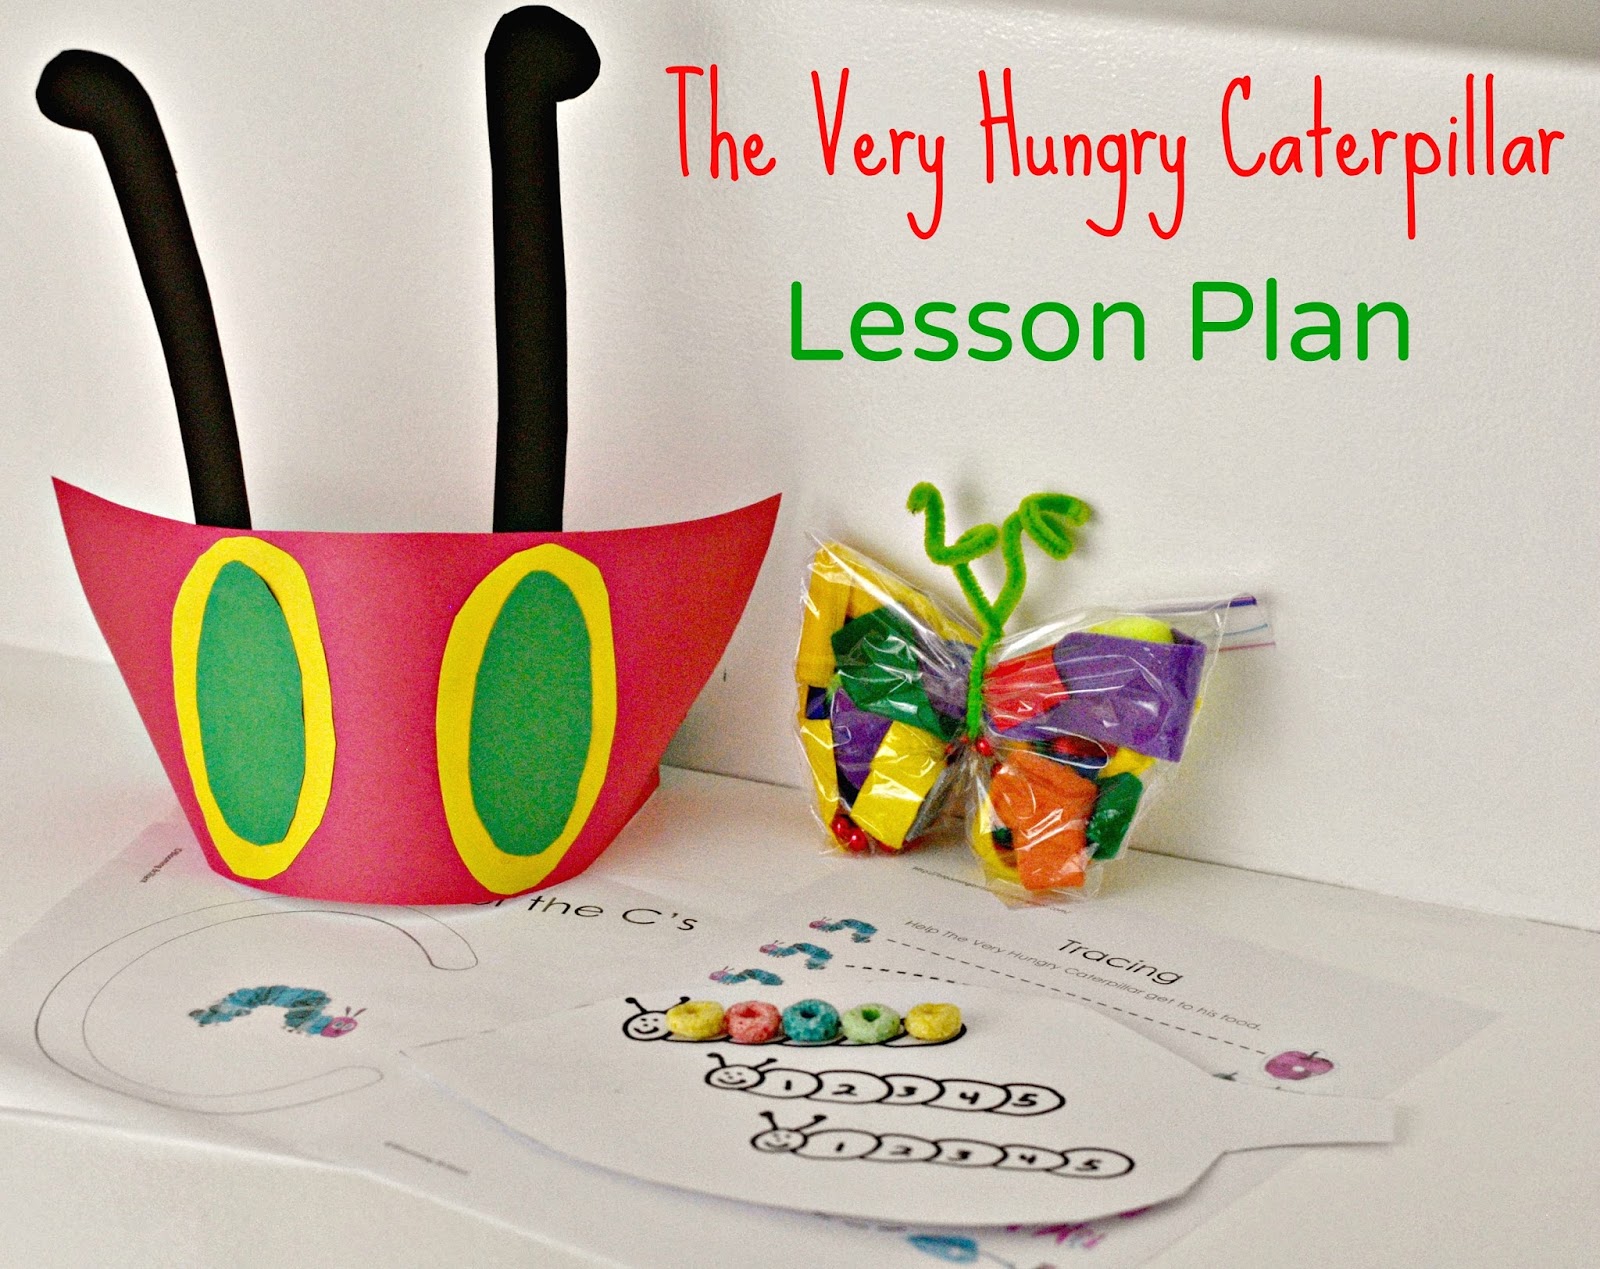 the very hungry caterpillar images